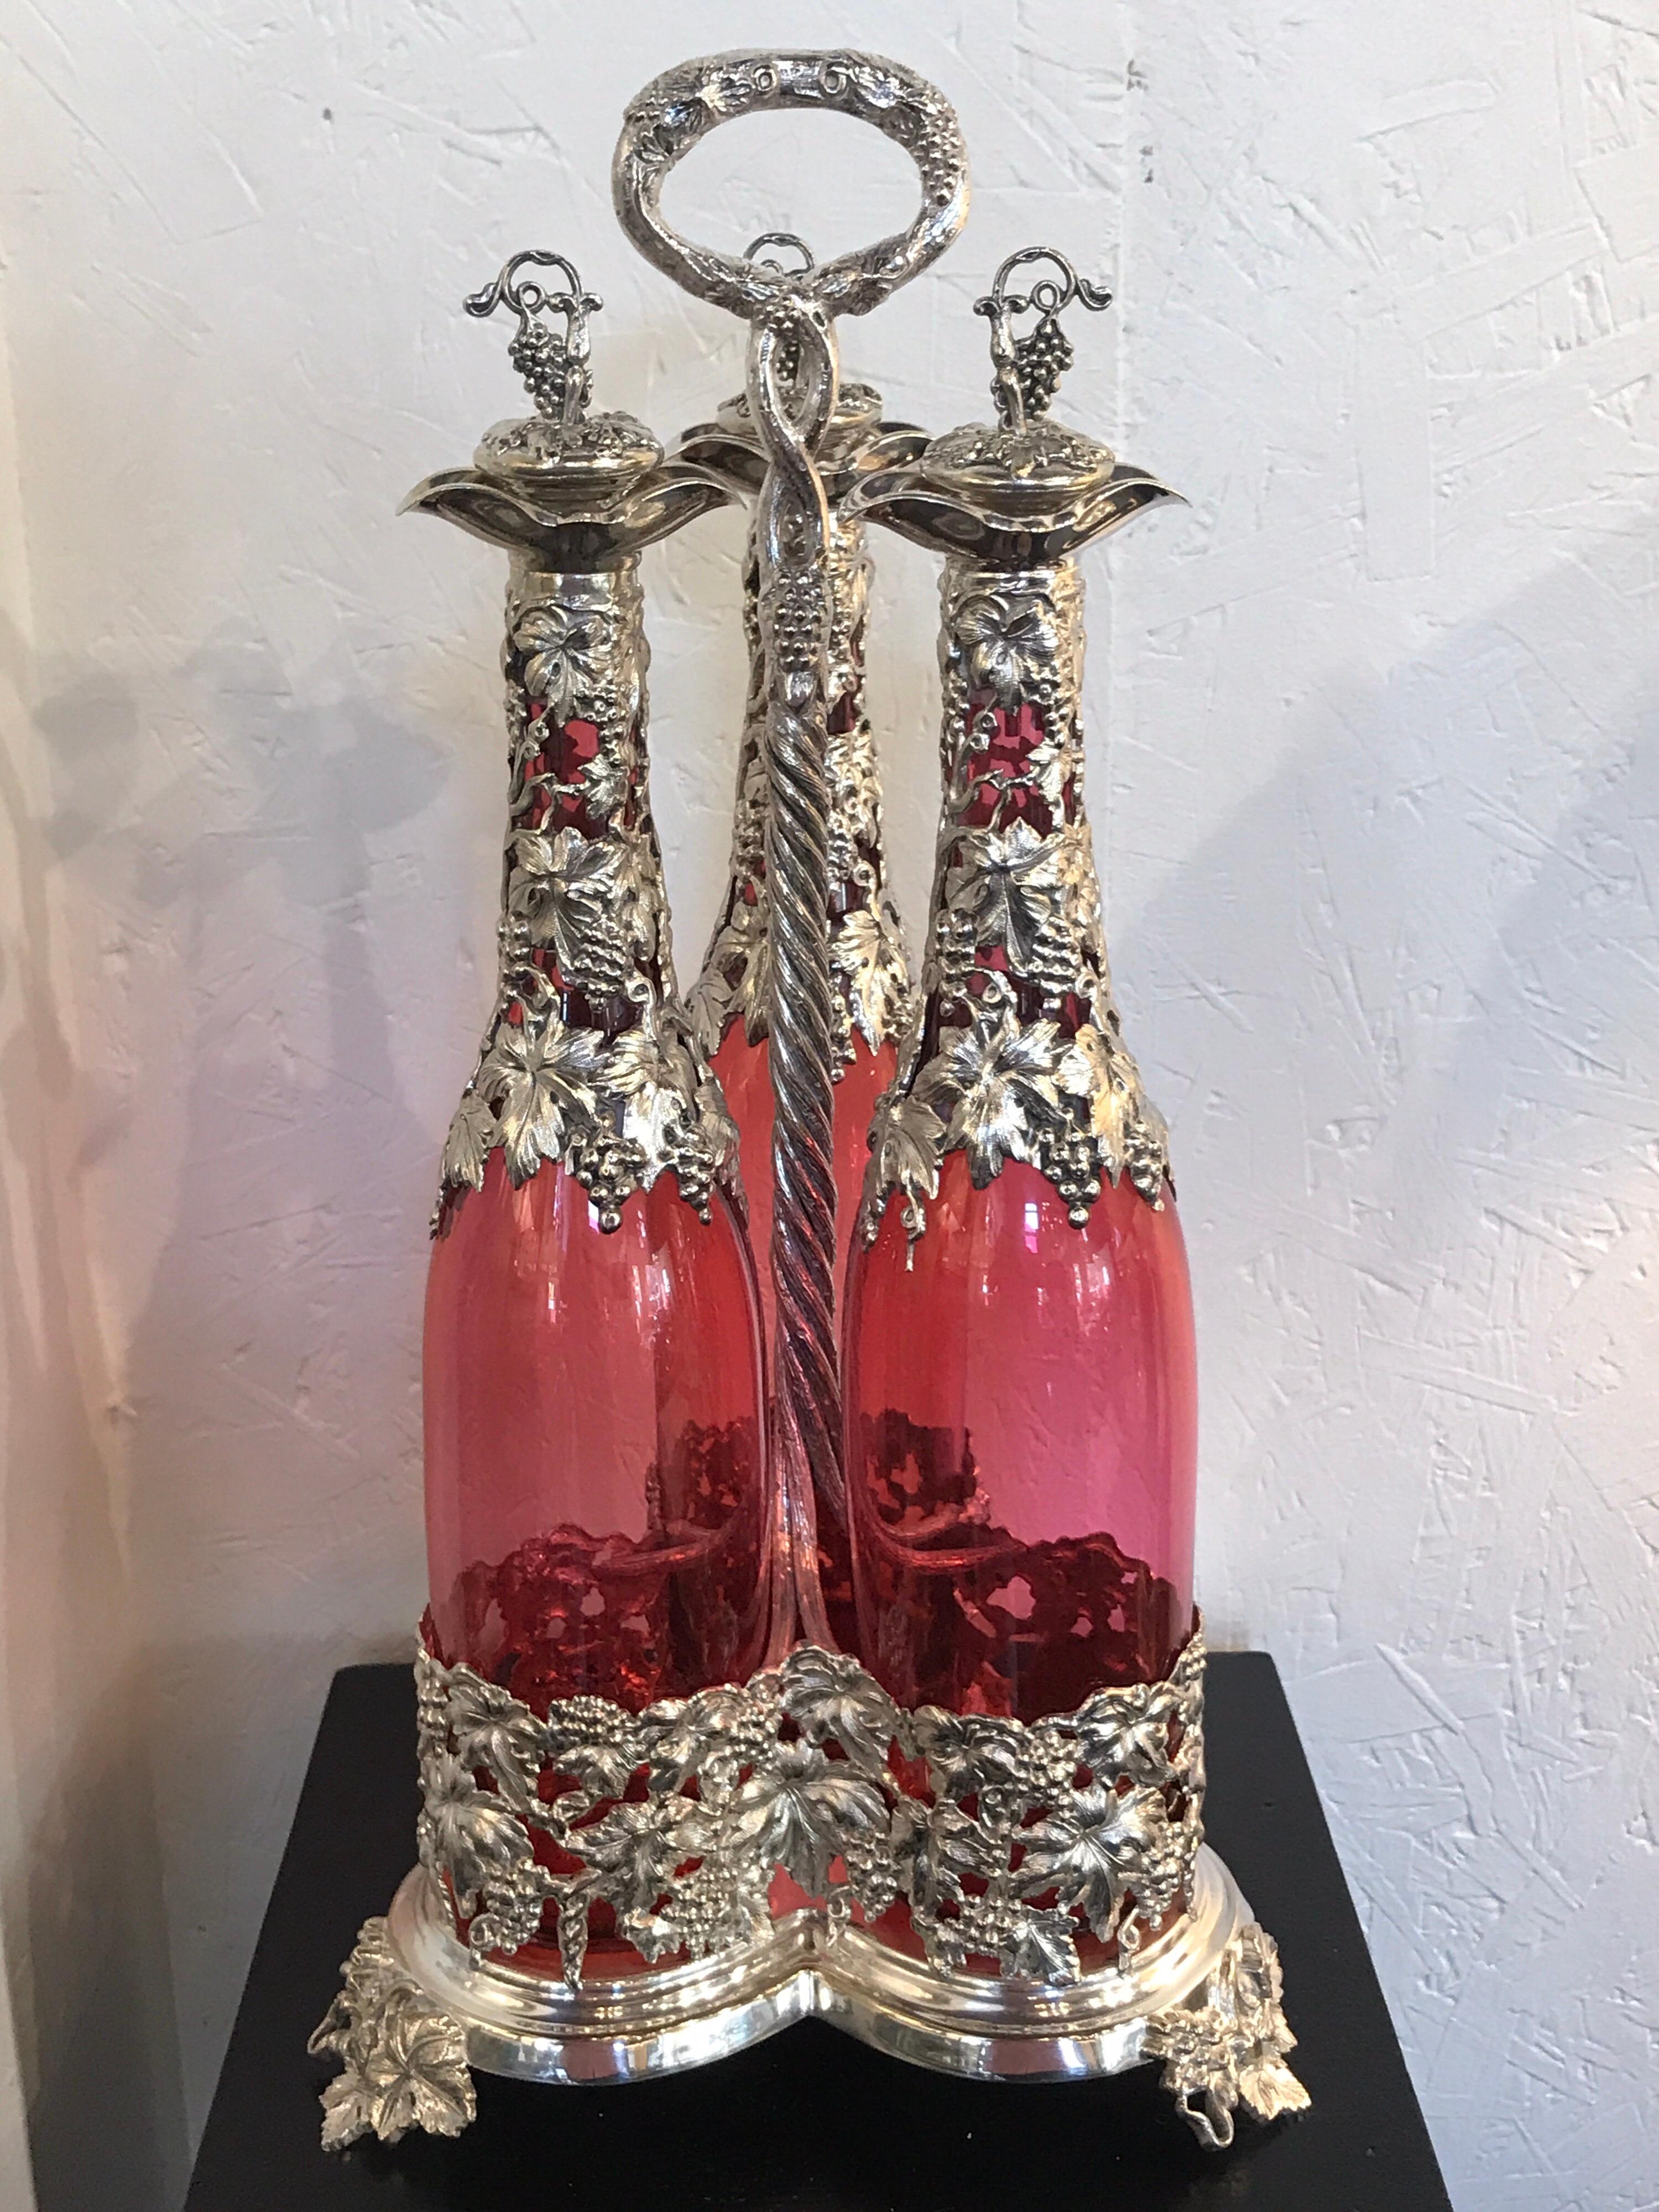 Stunning English silver plate and cranberry glass three-bottle Tauntless, with tall cranberry glass decanters dripping with applied silver work of grapes and vines. Fitted in an conforming, elaborate caddy, attributed to Elkington. Each bottle is